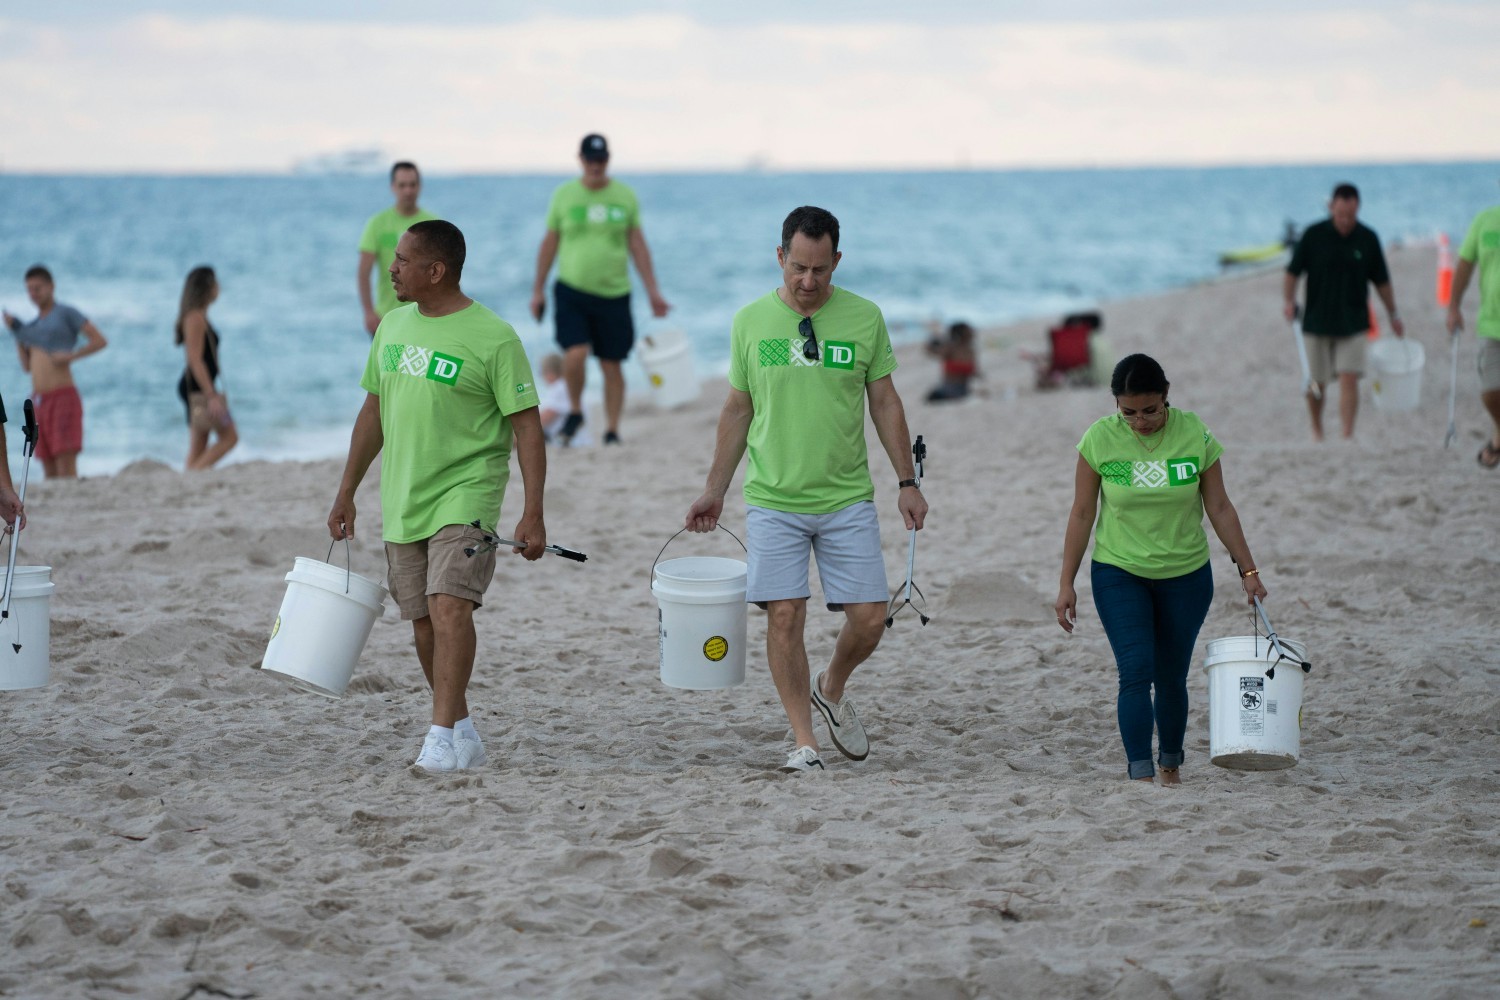 Our colleagues make a meaningful difference in their communities by supporting a beach clean-up event